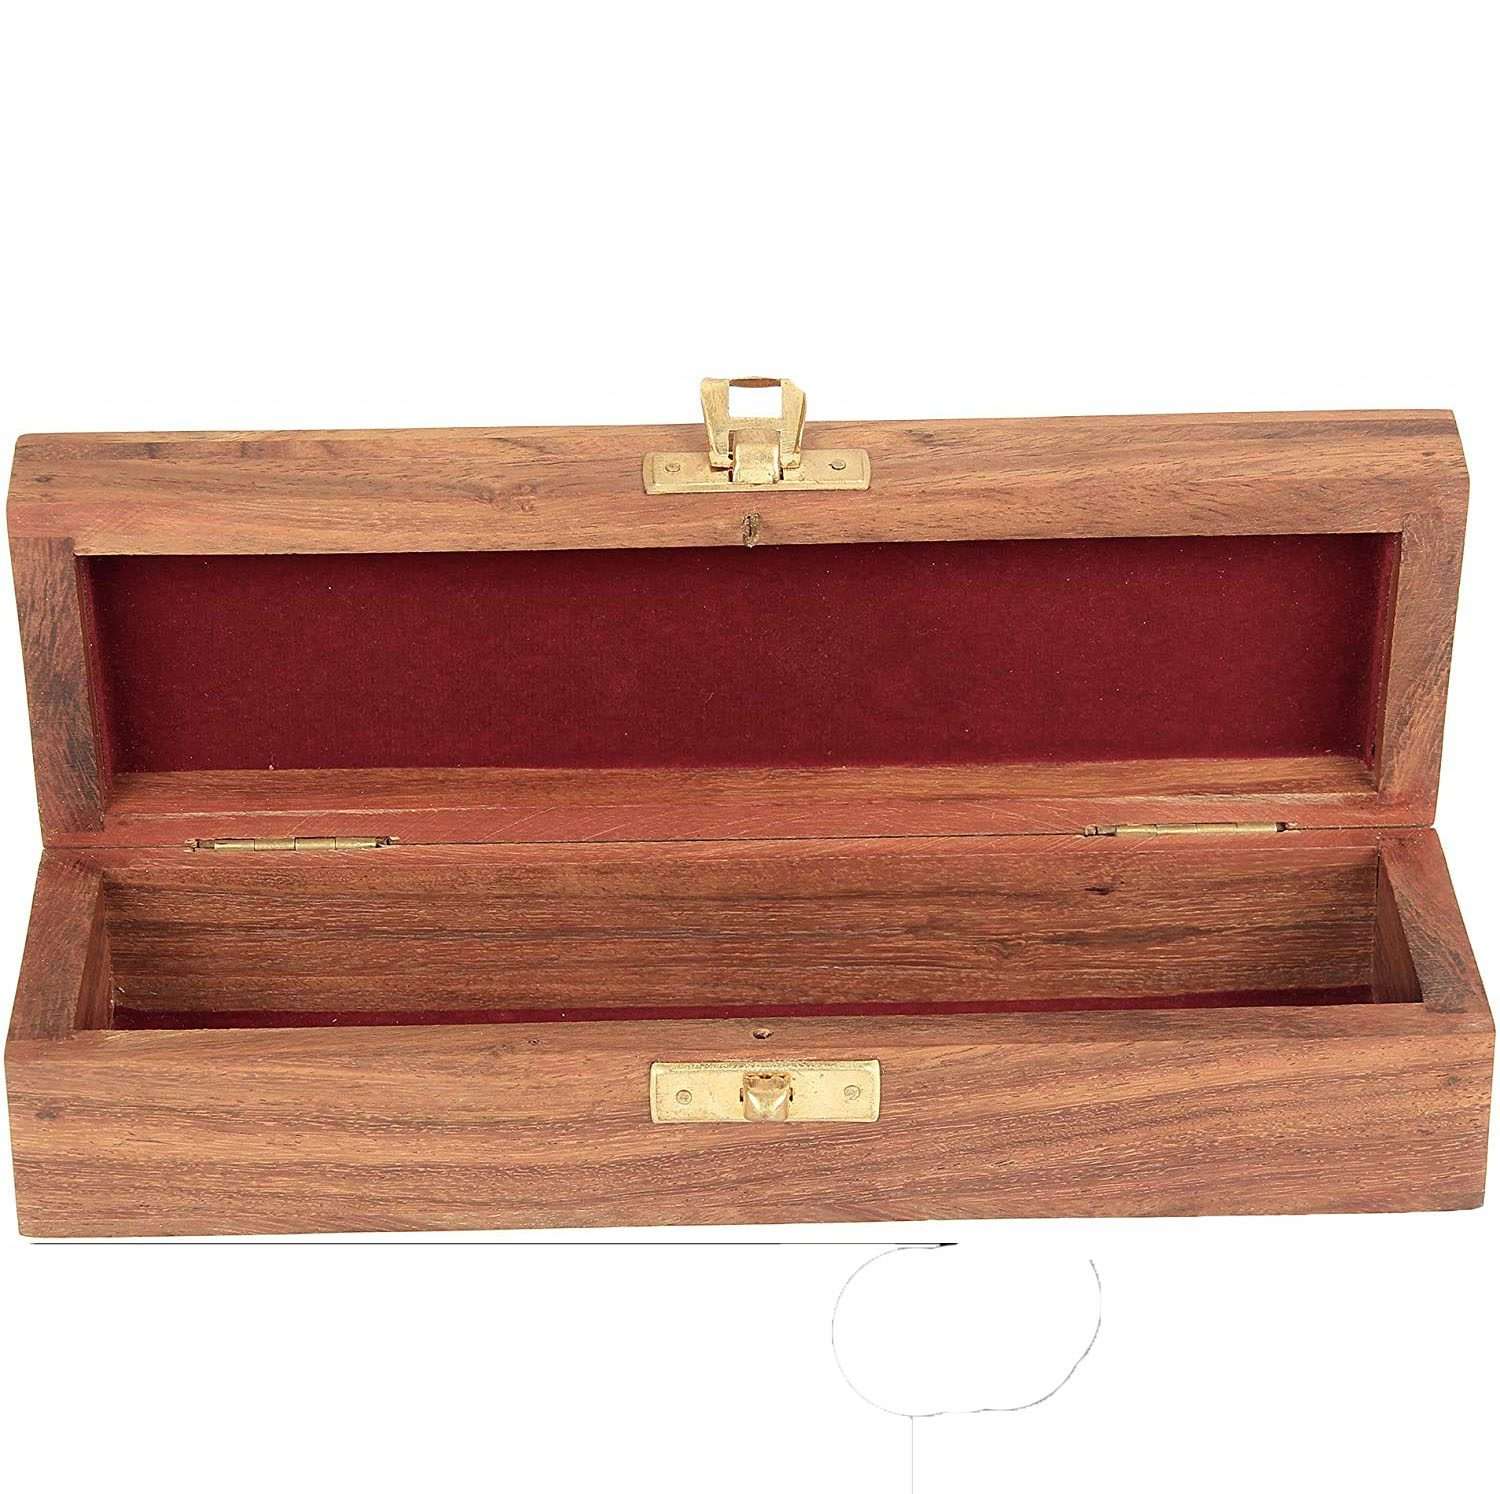 Handmade Wooden Jewellery Box | Pencil Box for Jewel Organizer | Hand Carved Carvings | Gift Items